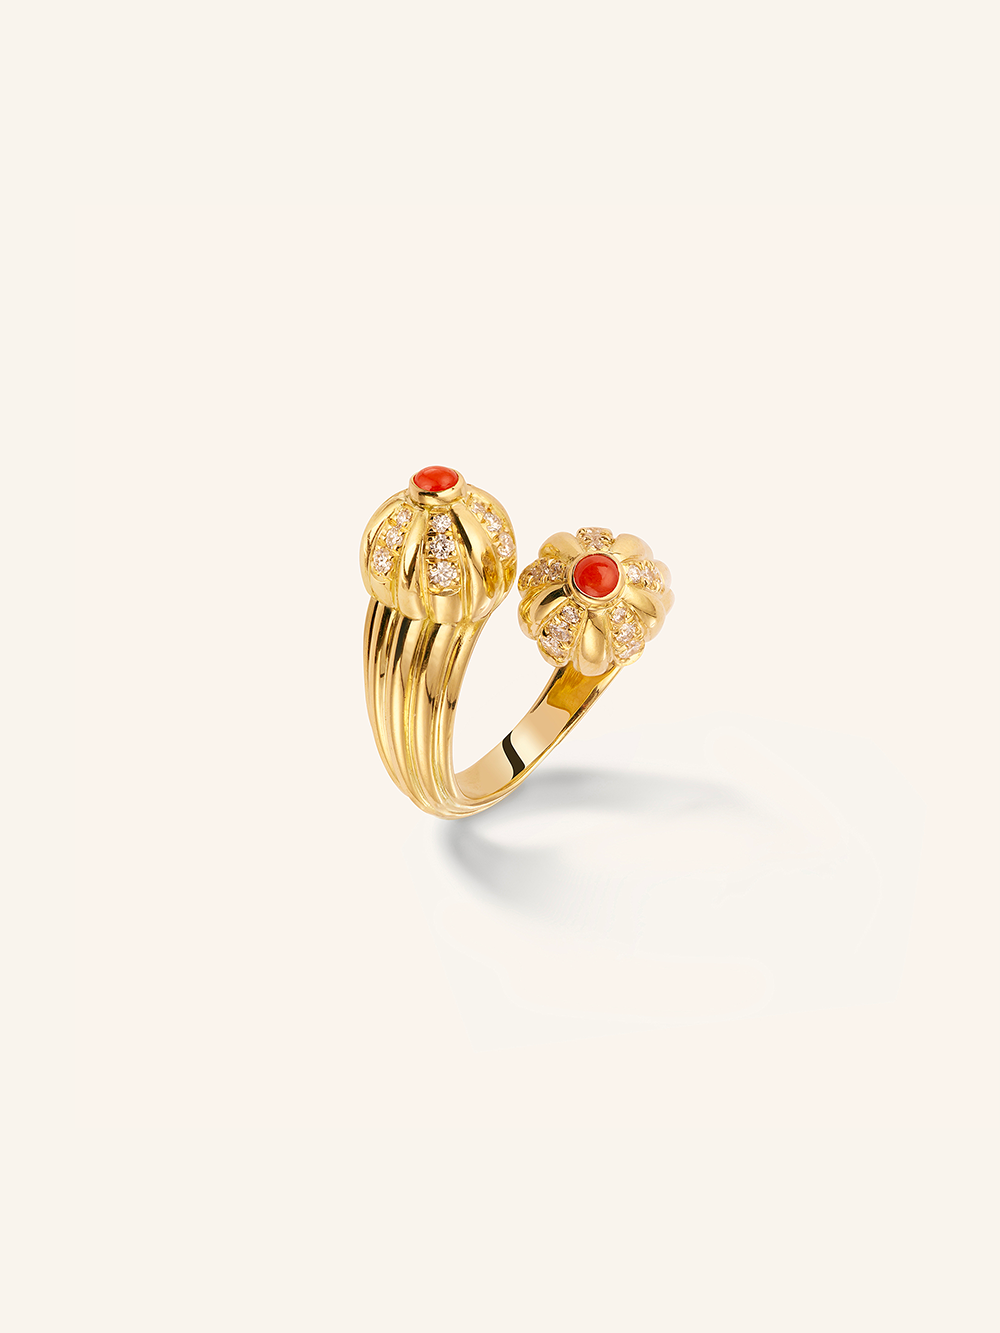 DOUBLE RING GELATO YELLOW CORAL AND DIAMONDS